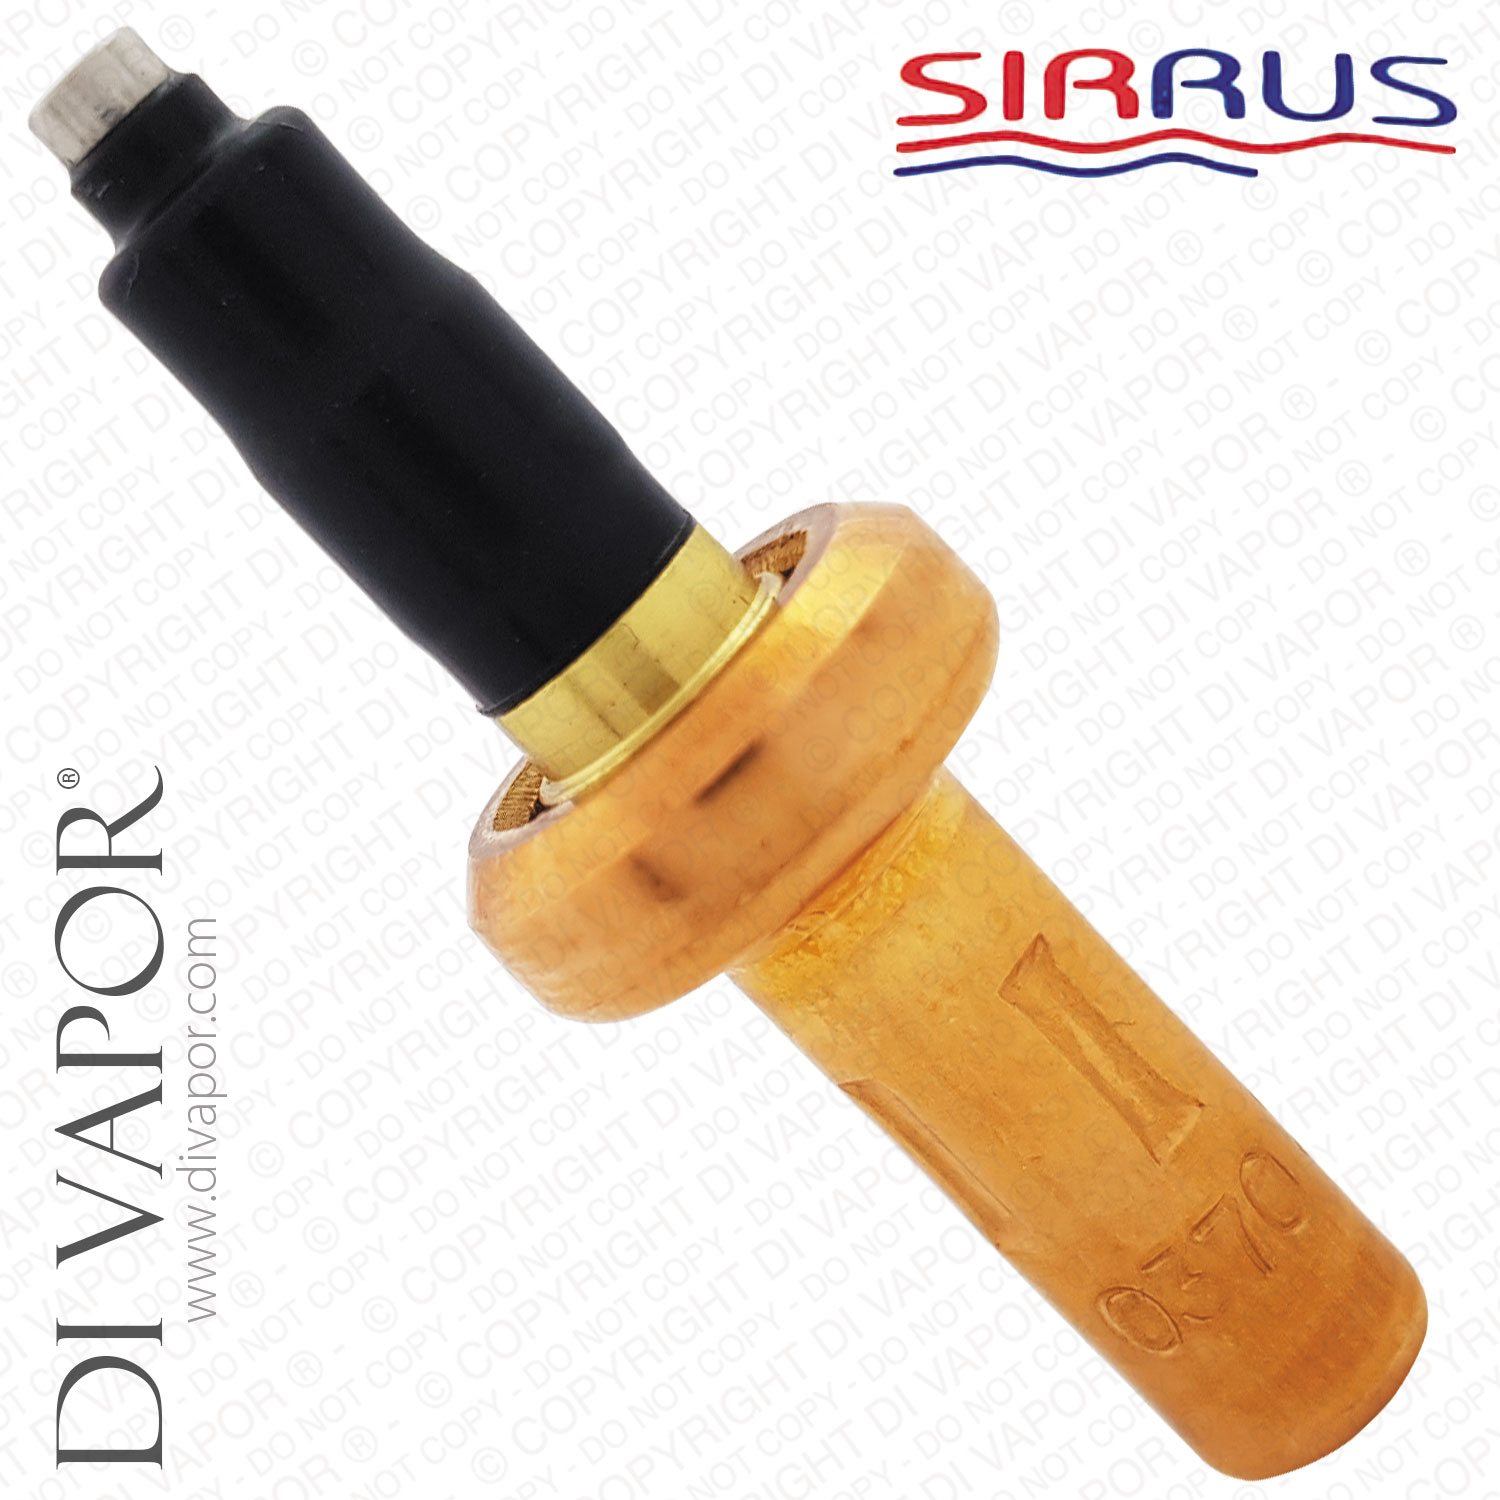 Thermostat Element for Sirrus